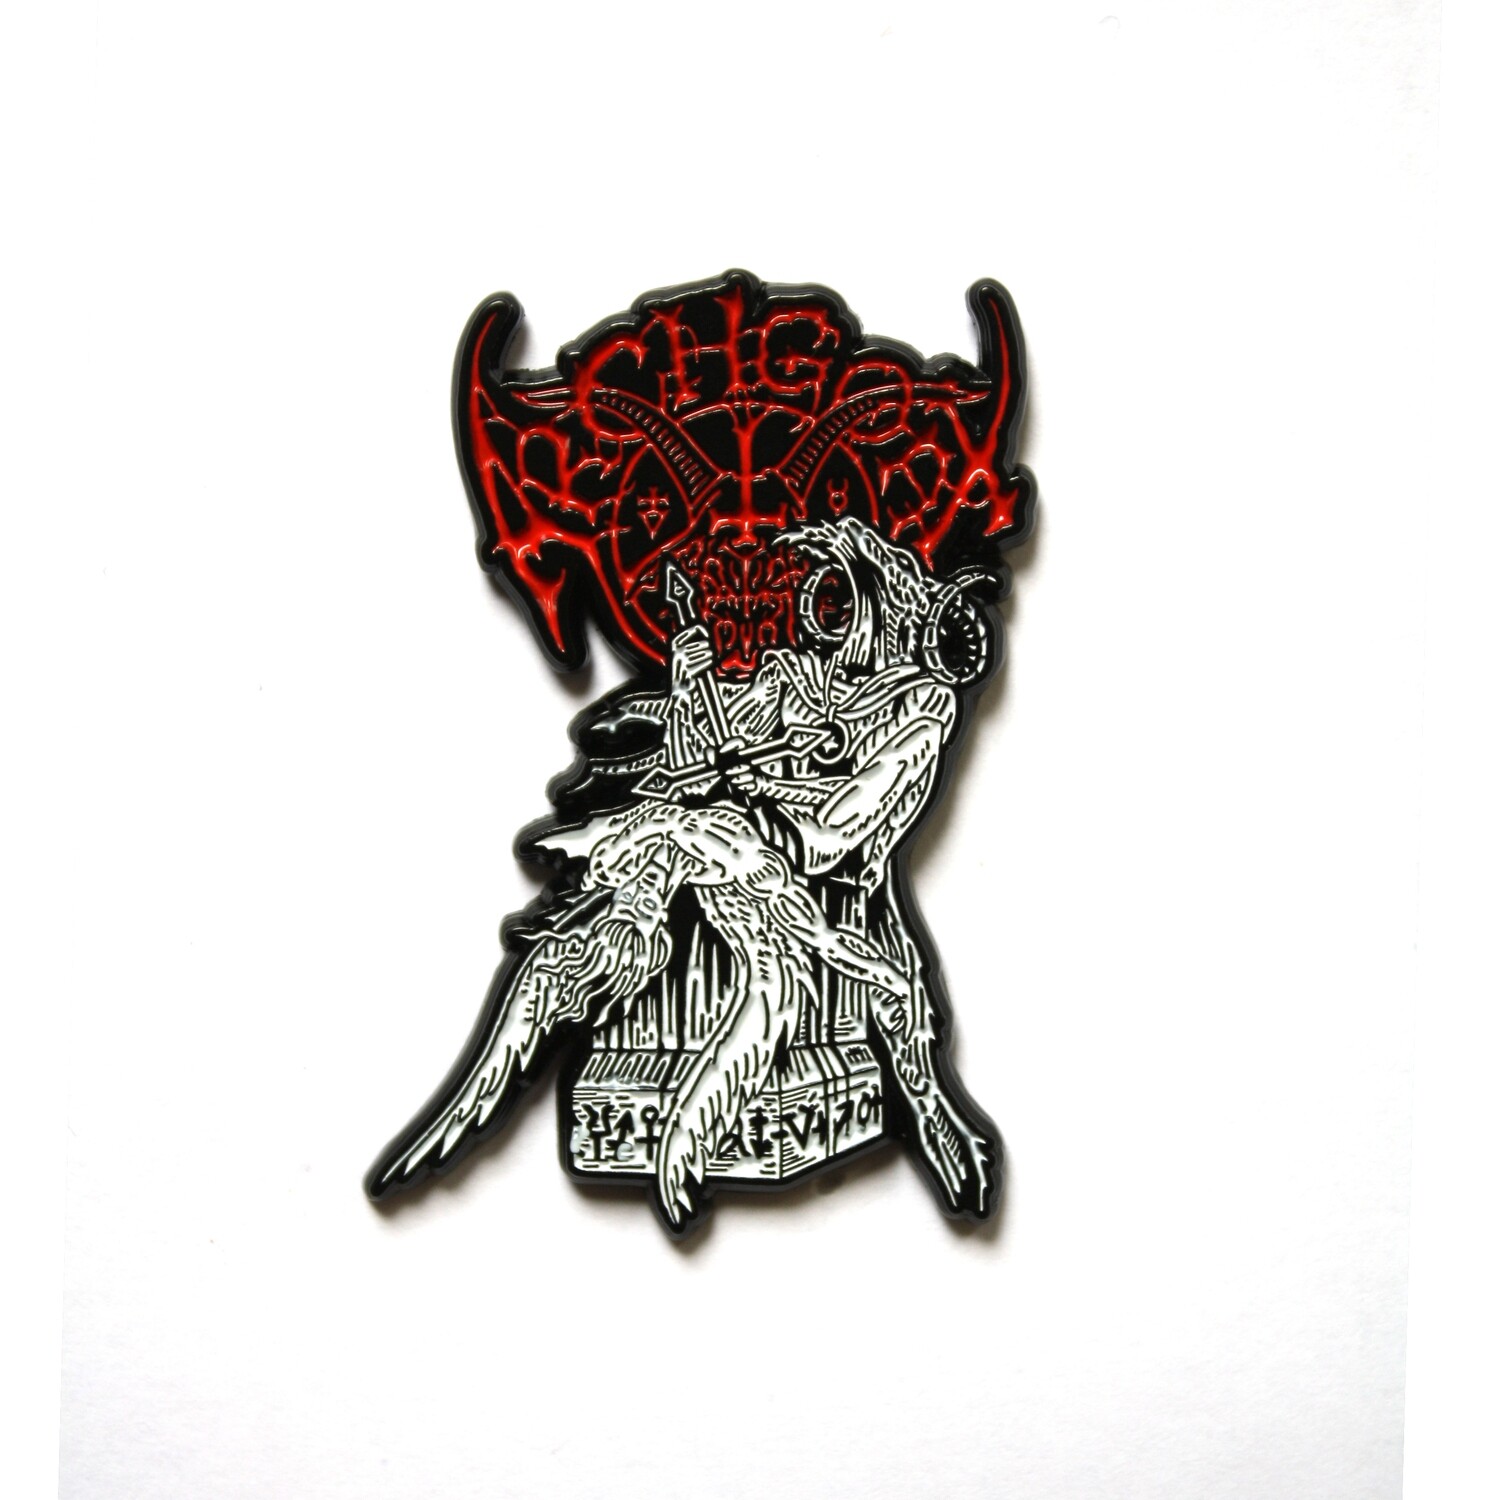 Archgoat - Angelcunt Pin